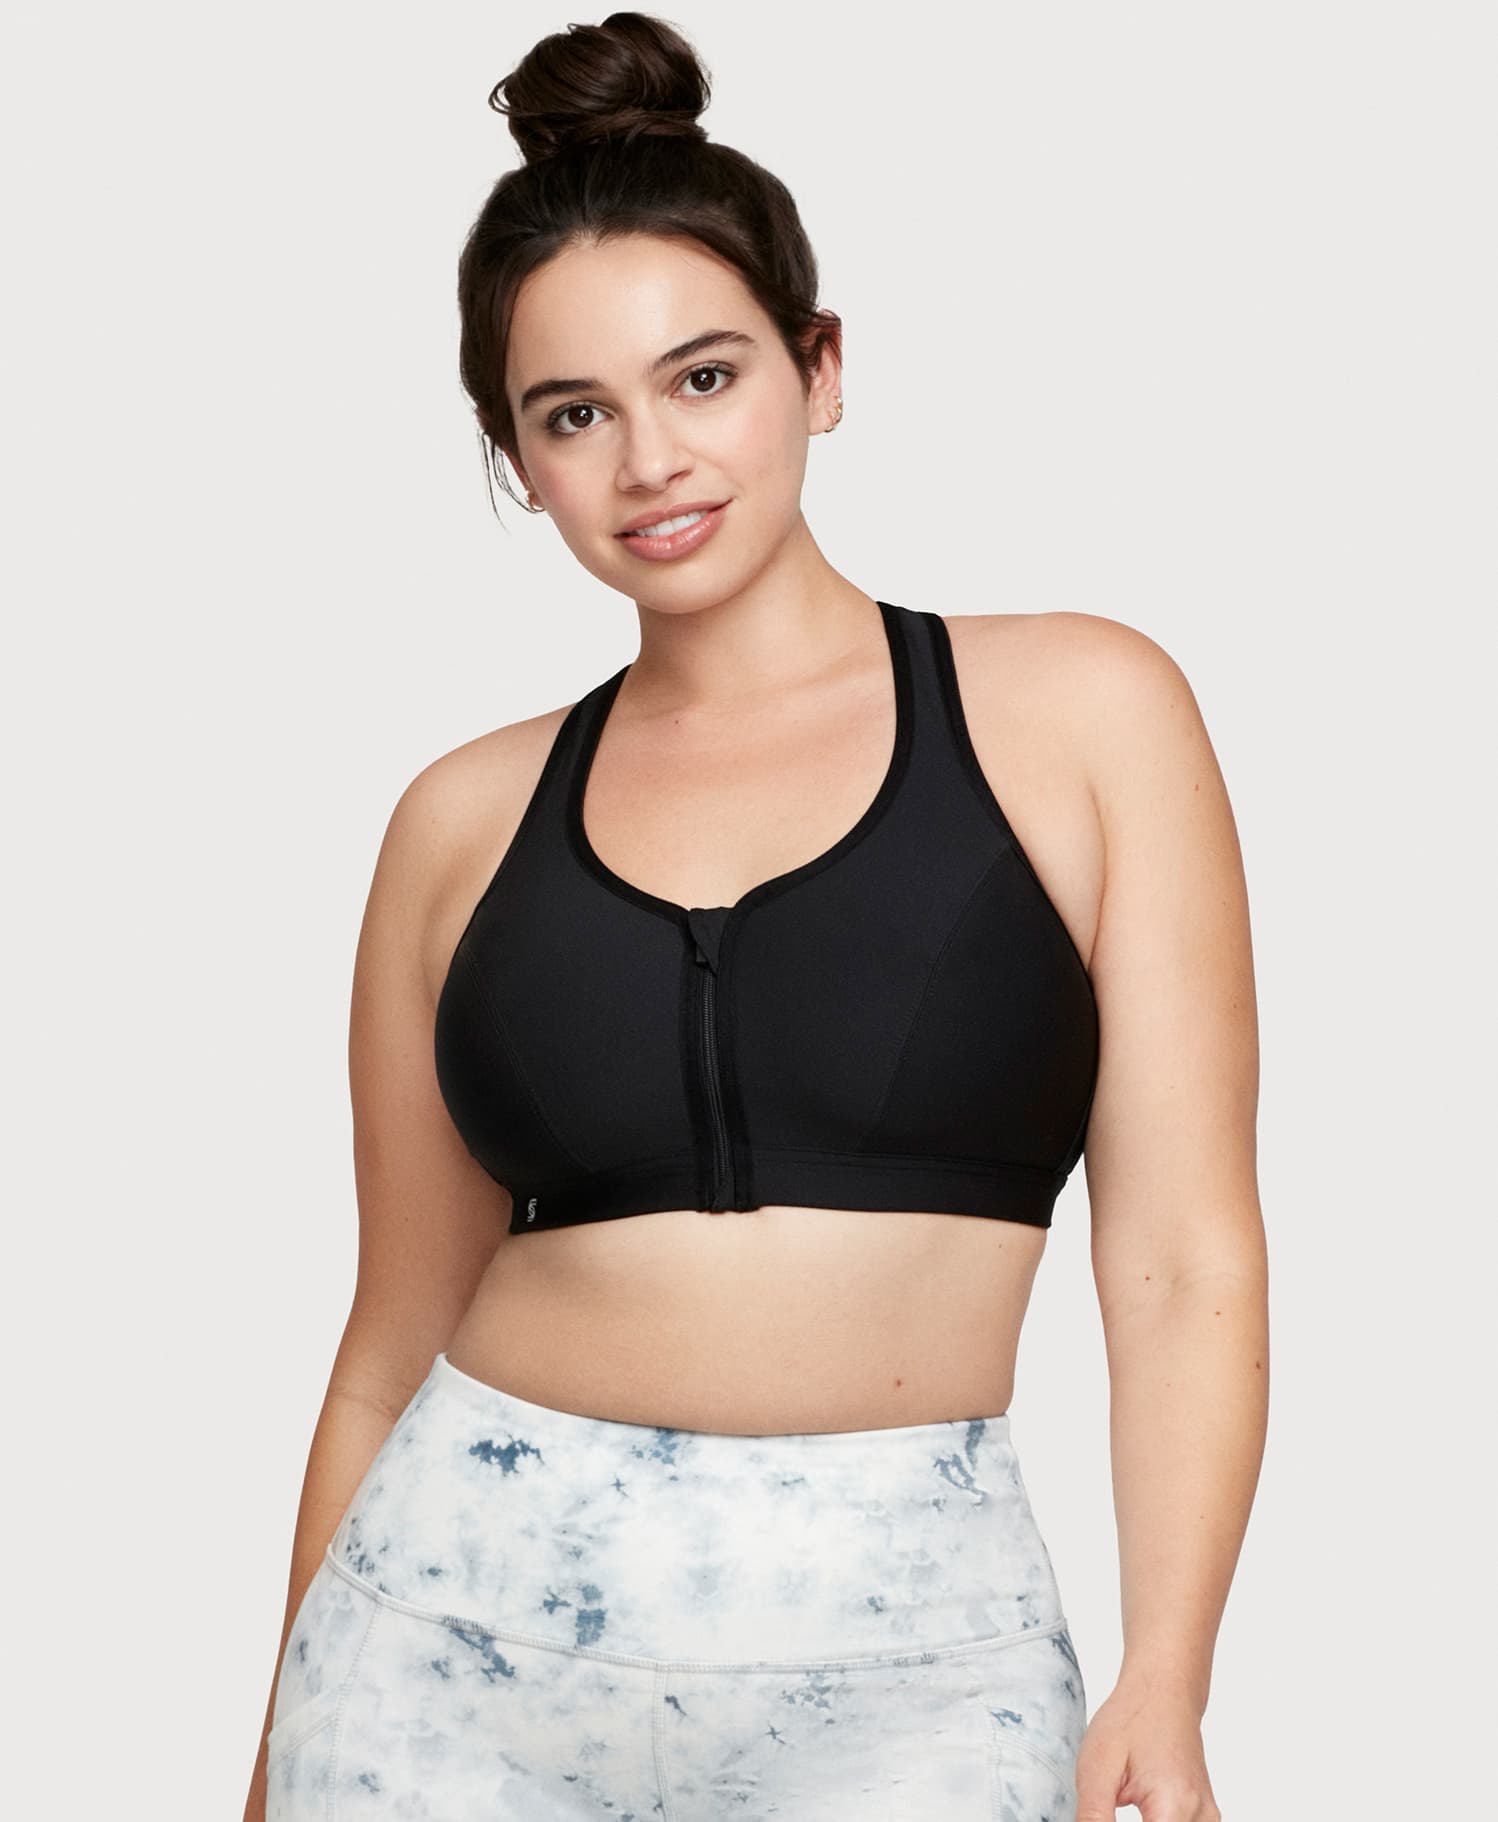 Glamorise Zip-Up Front-Close Wire-Free Sports Bra Black Size 42 G / DDDD -  $14 New With Tags - From jello